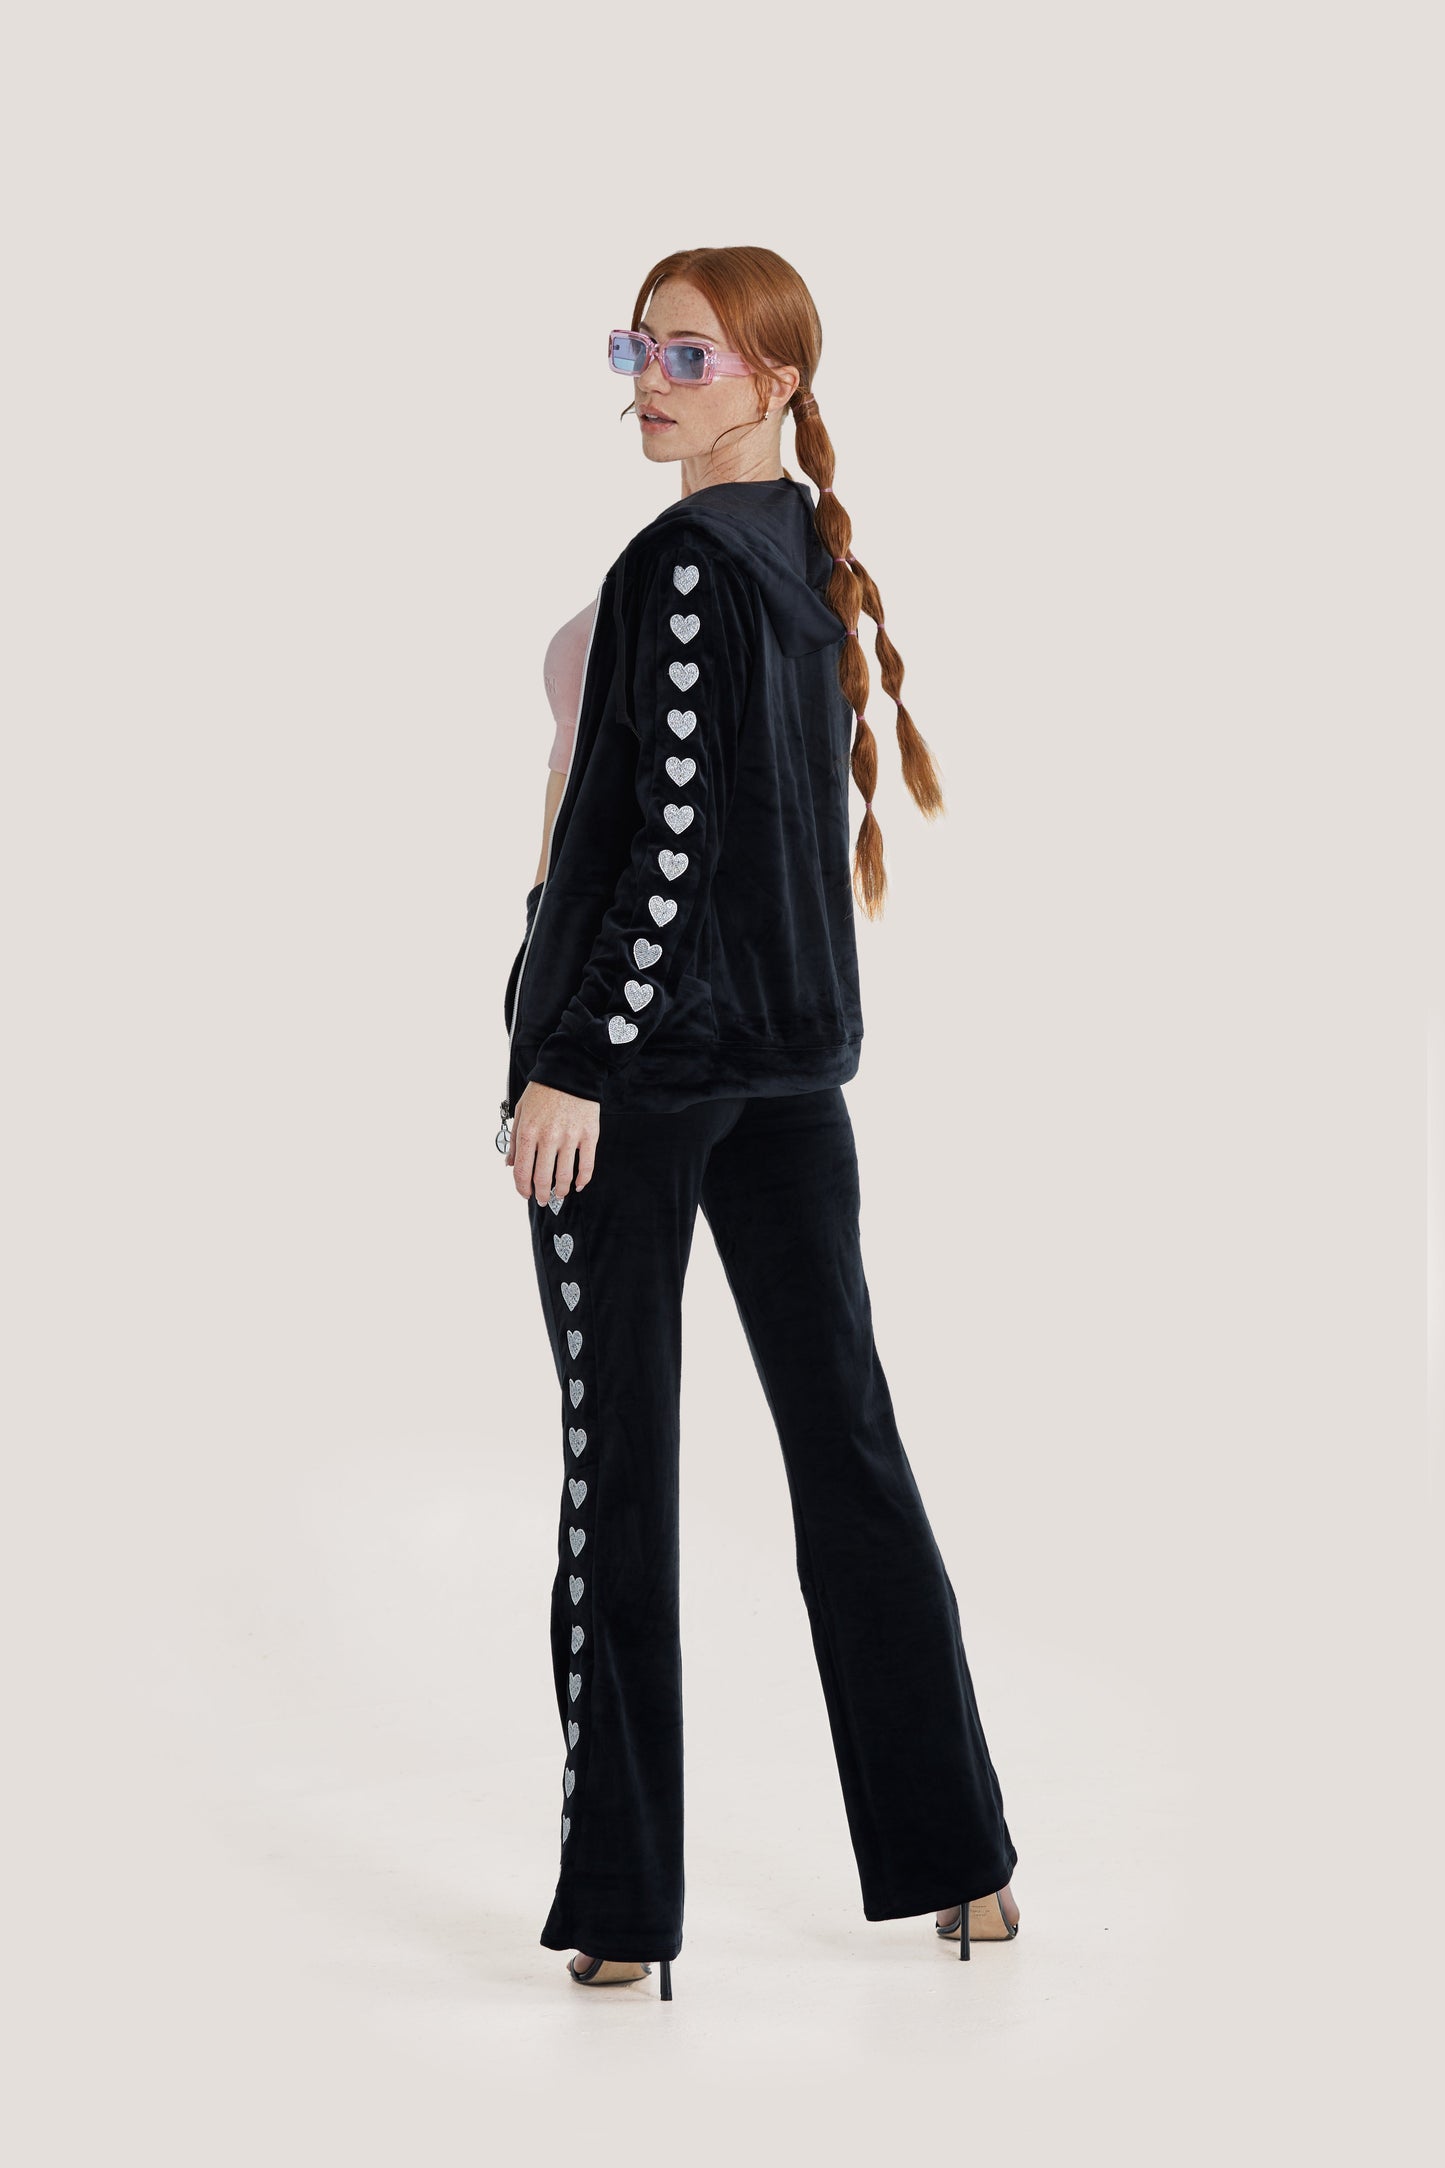 Heart on Your Sleeve Pant by Paris Hilton Tracksuits